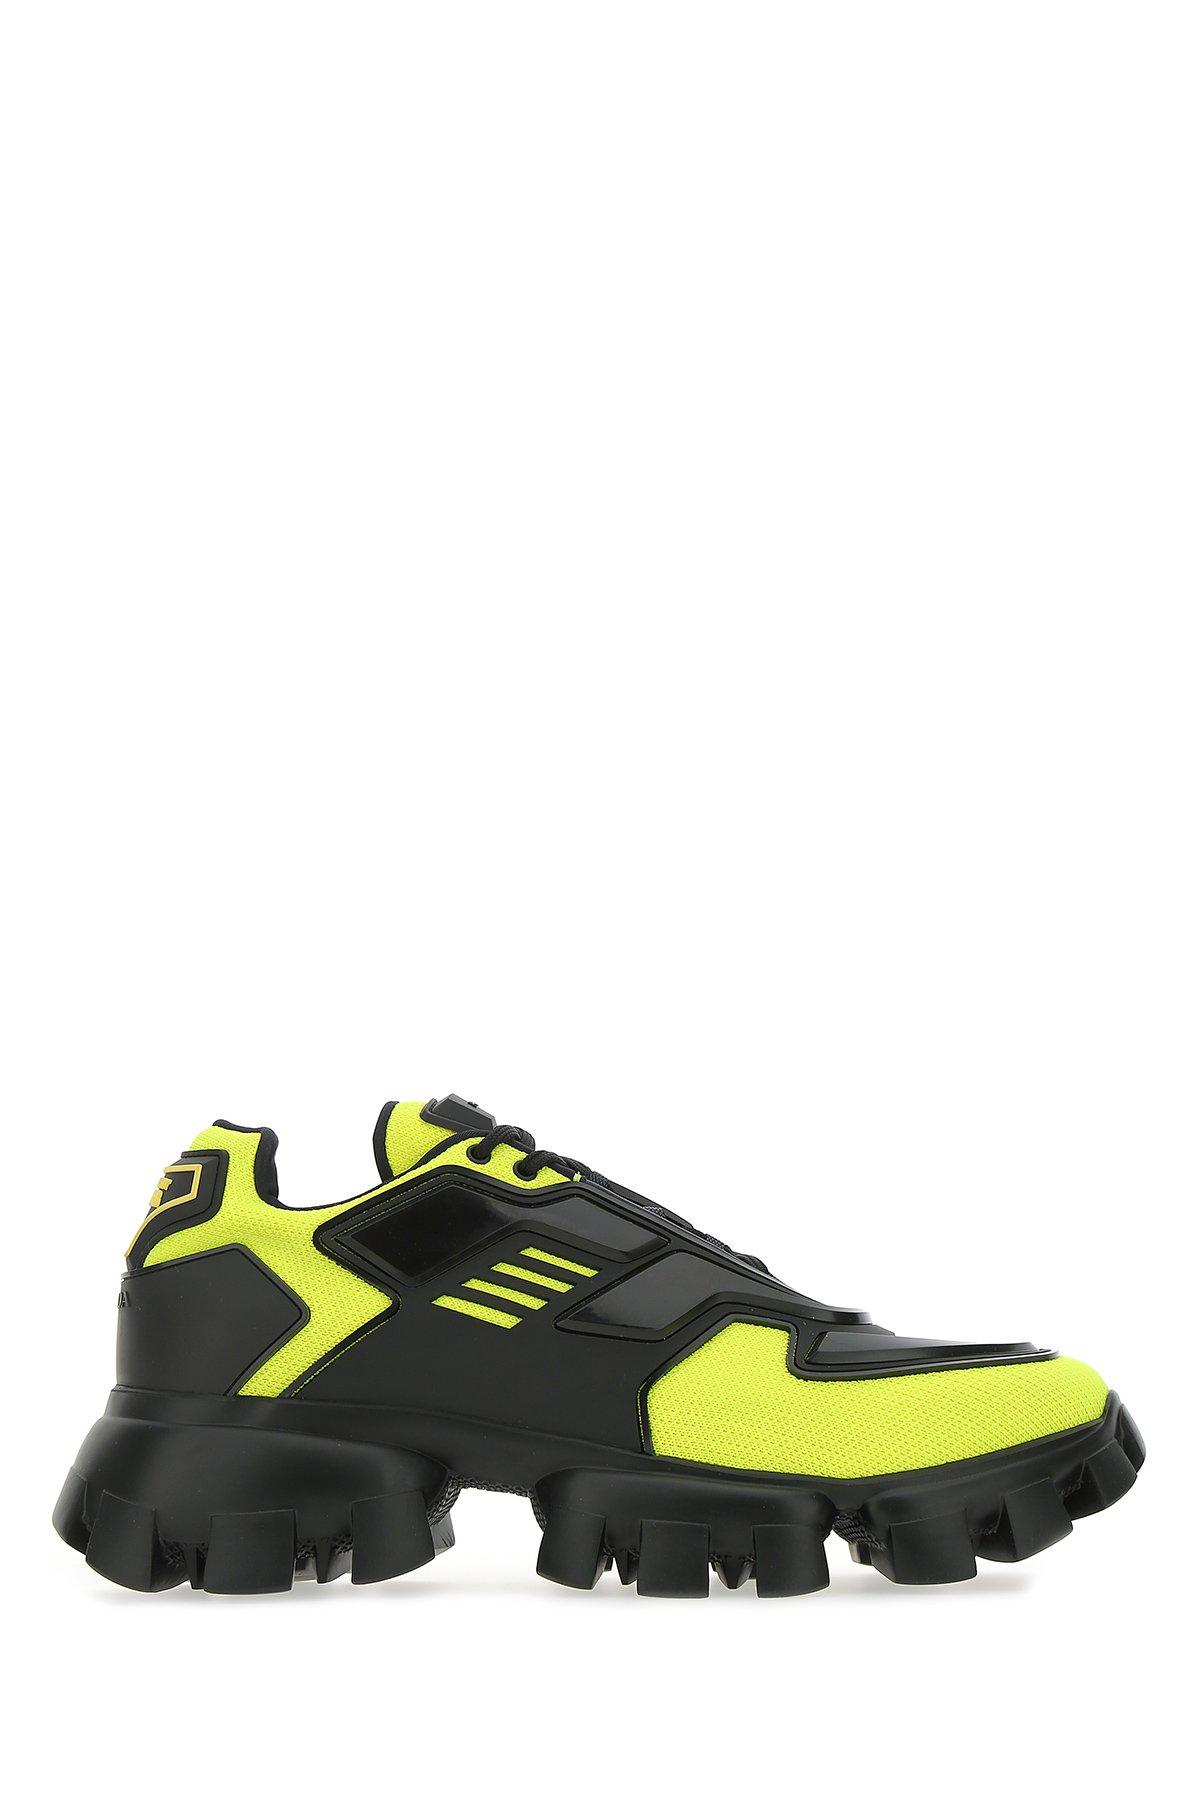 Prada Synthetic Cloudbust Thunder Sneakers for Men - Lyst